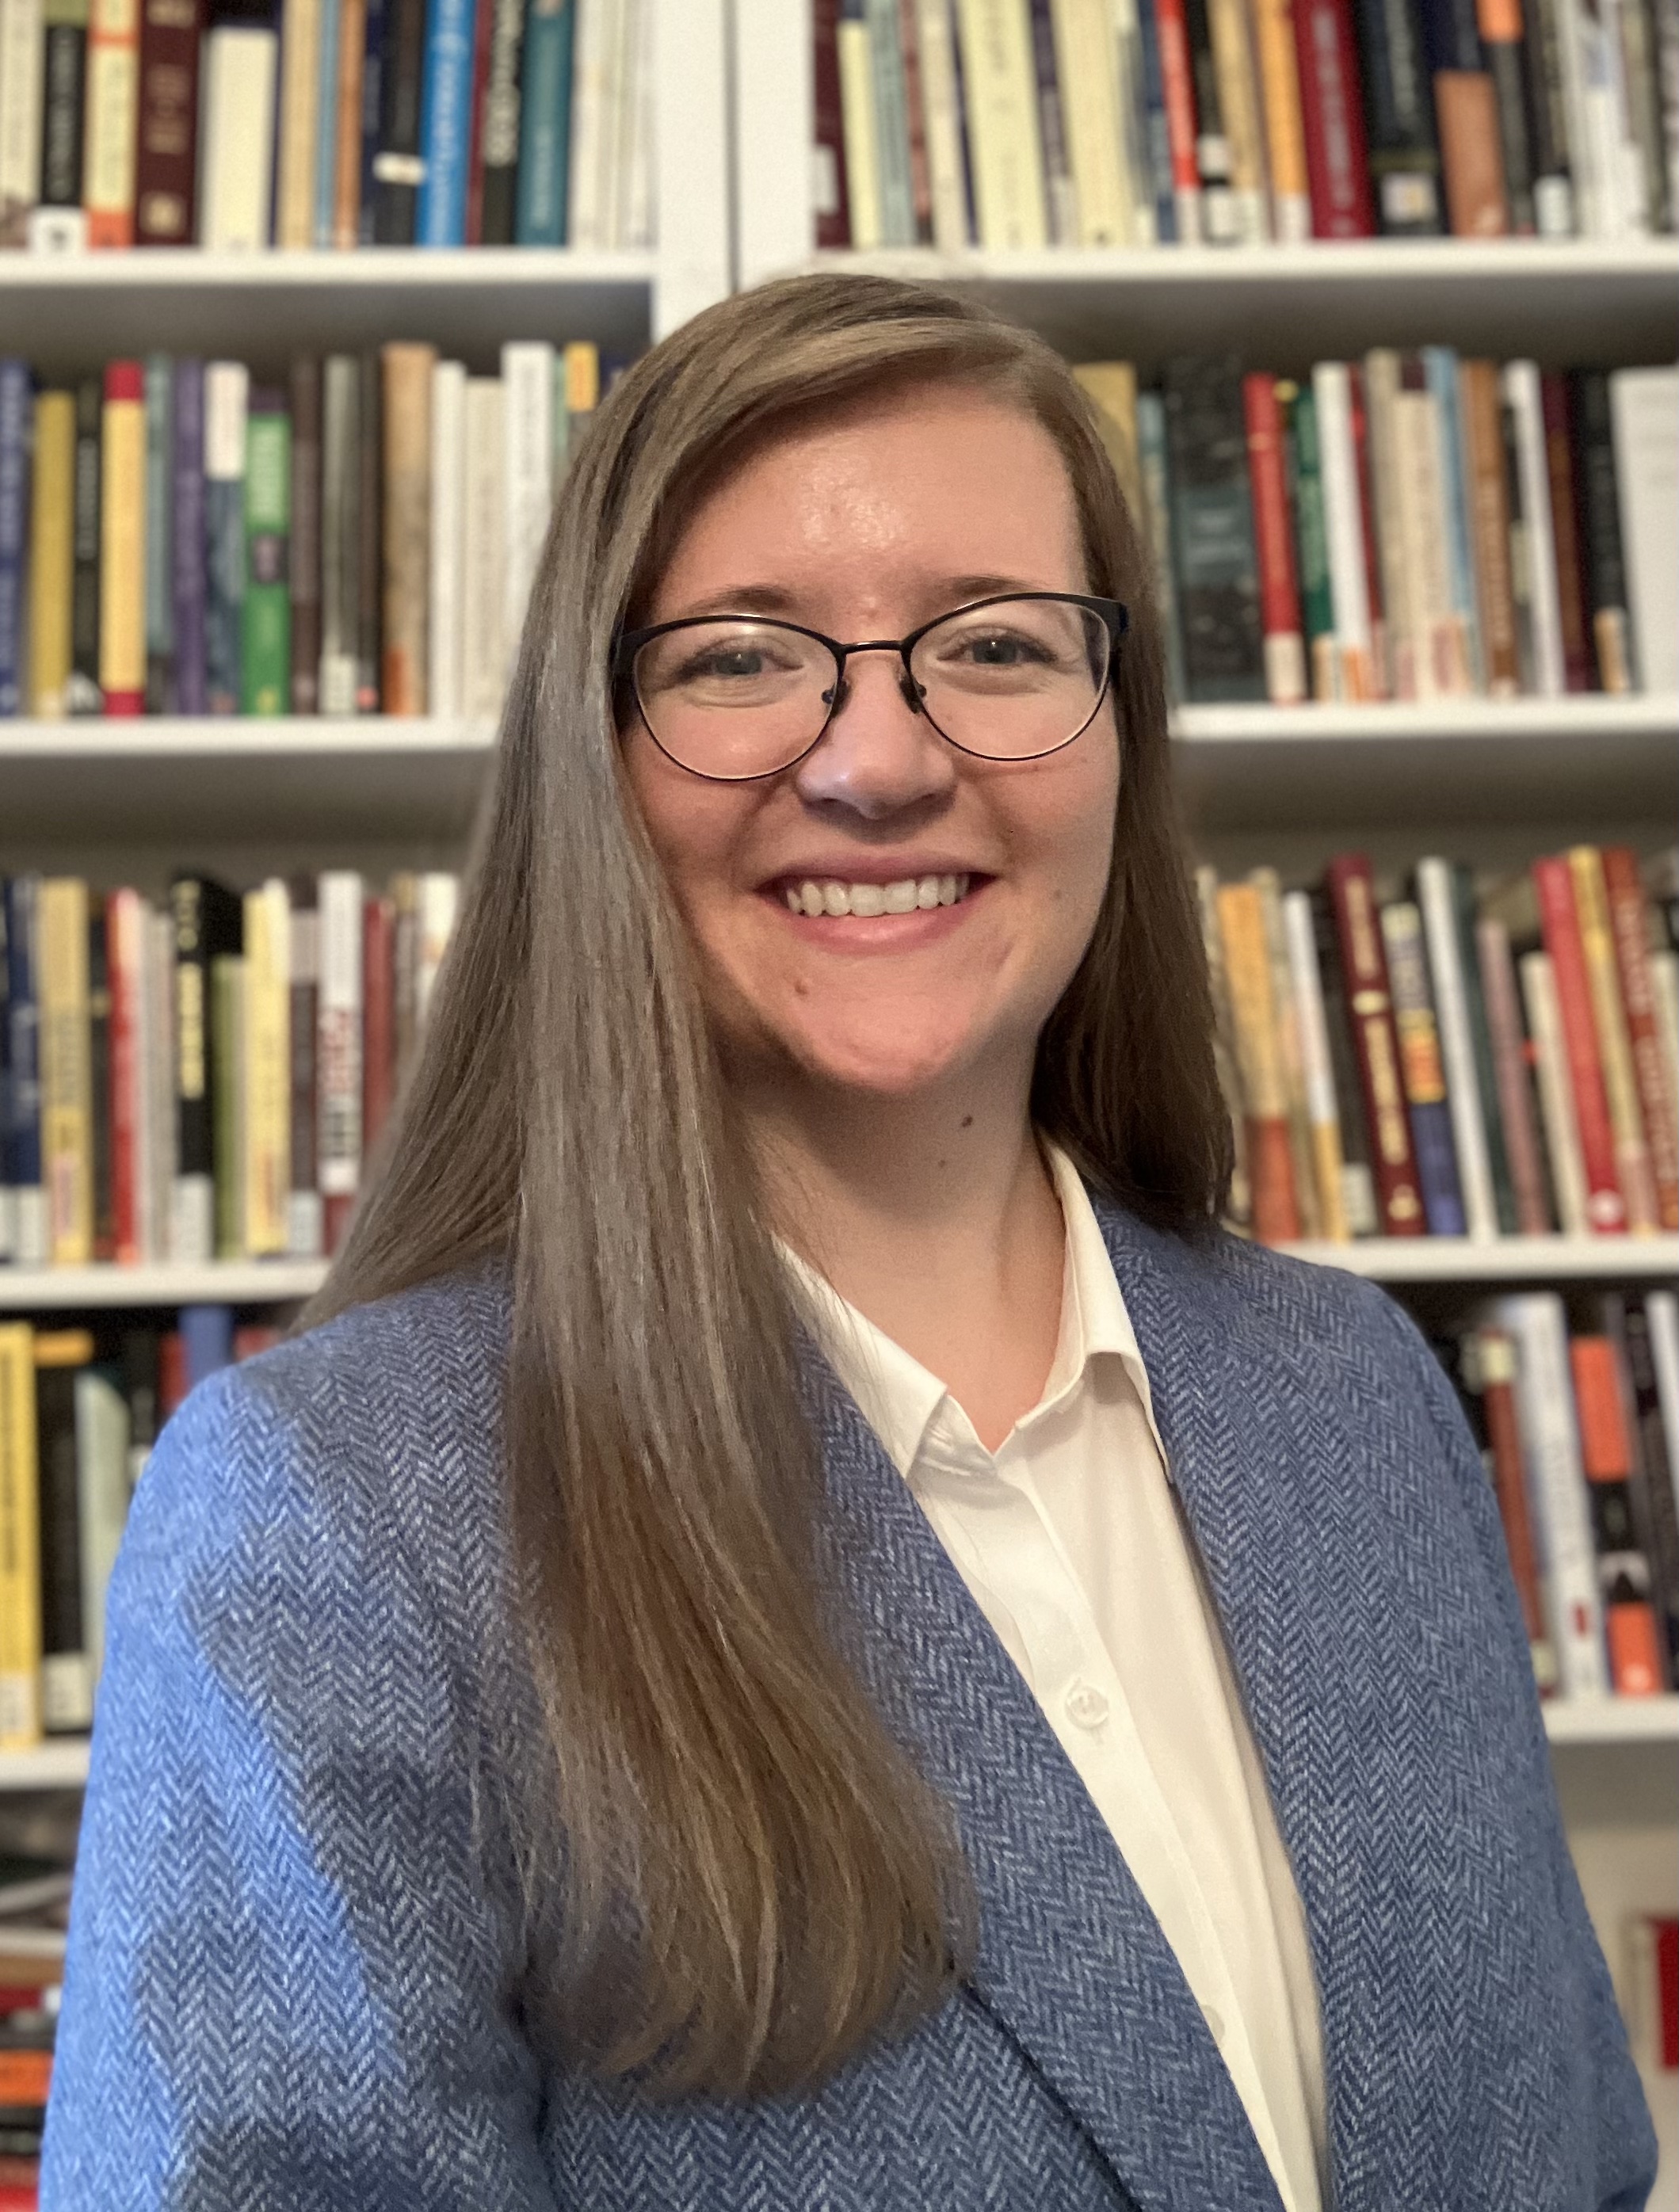 A photo of Megan Gooley, a doctoral student in the theological and social ethics track in the Theology Department at Fordham University